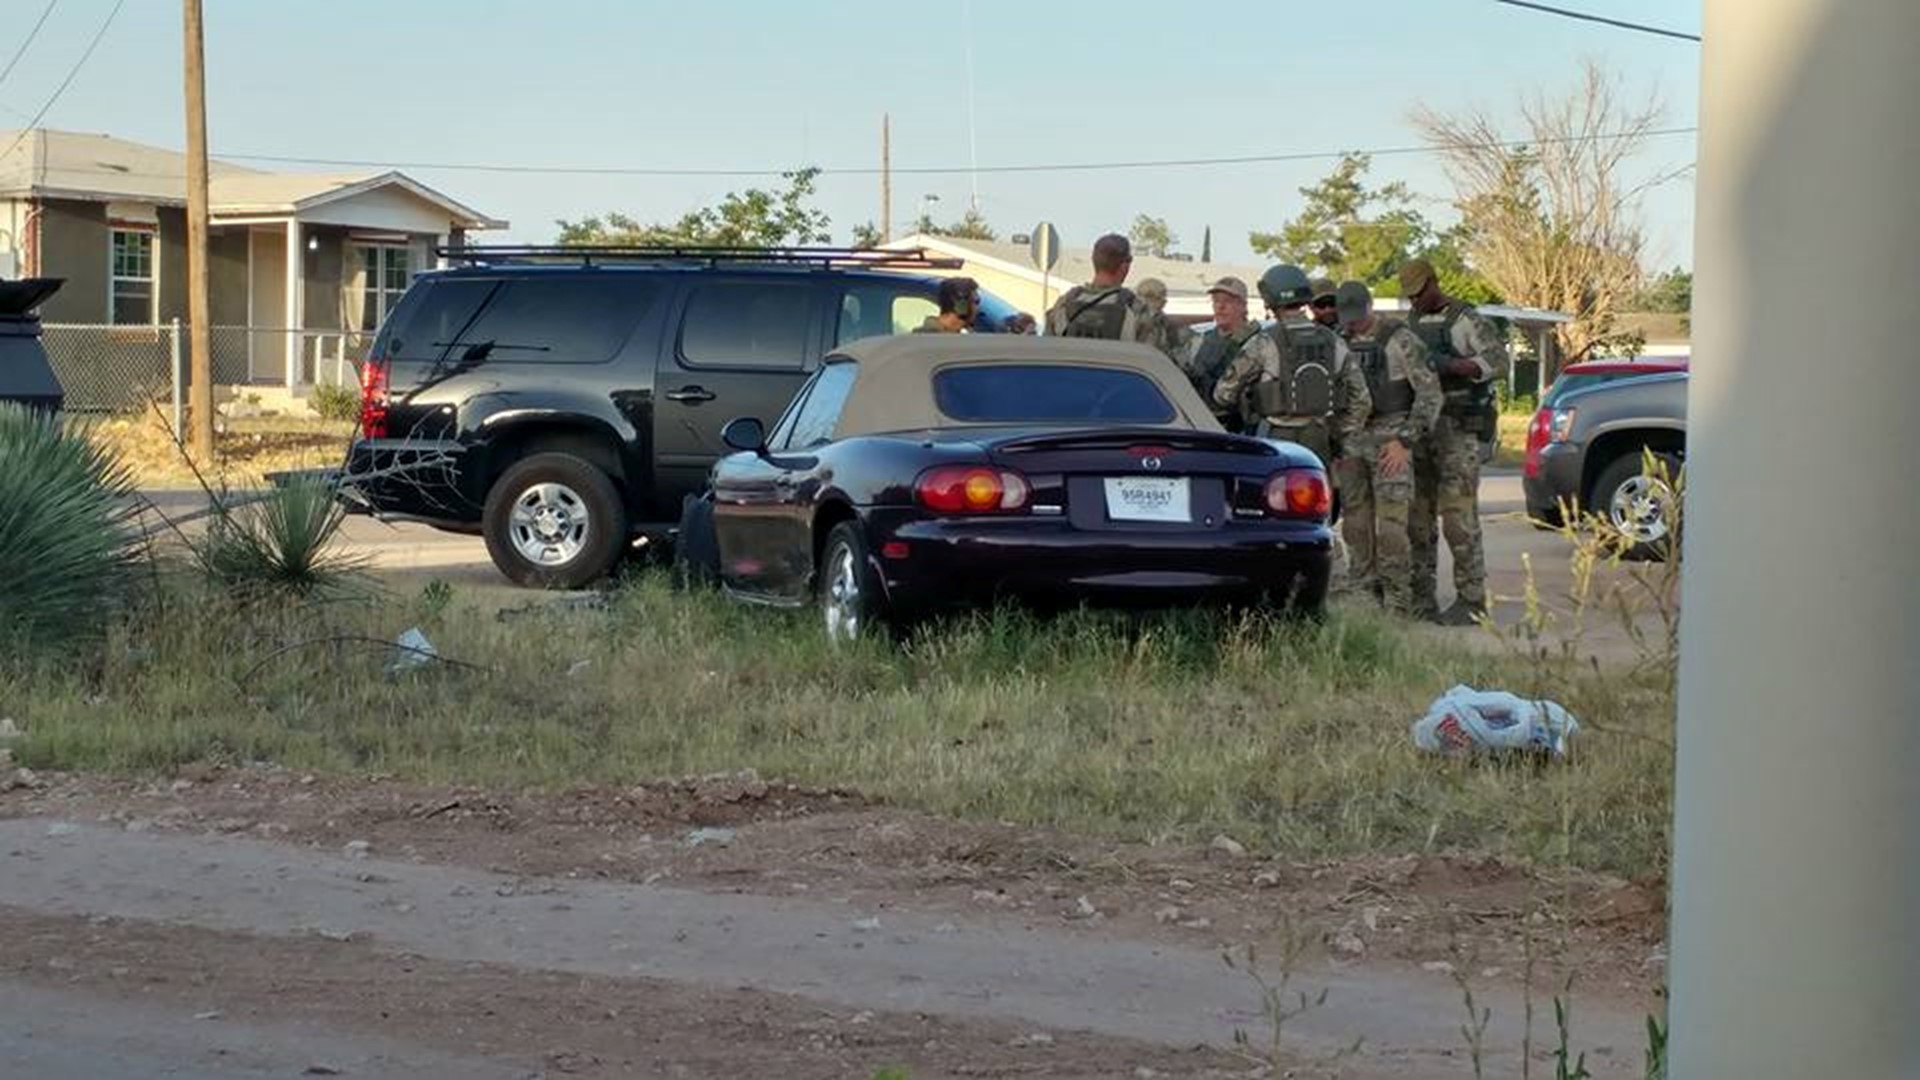 32 arrested following joint drug operation in Midland, Odessa